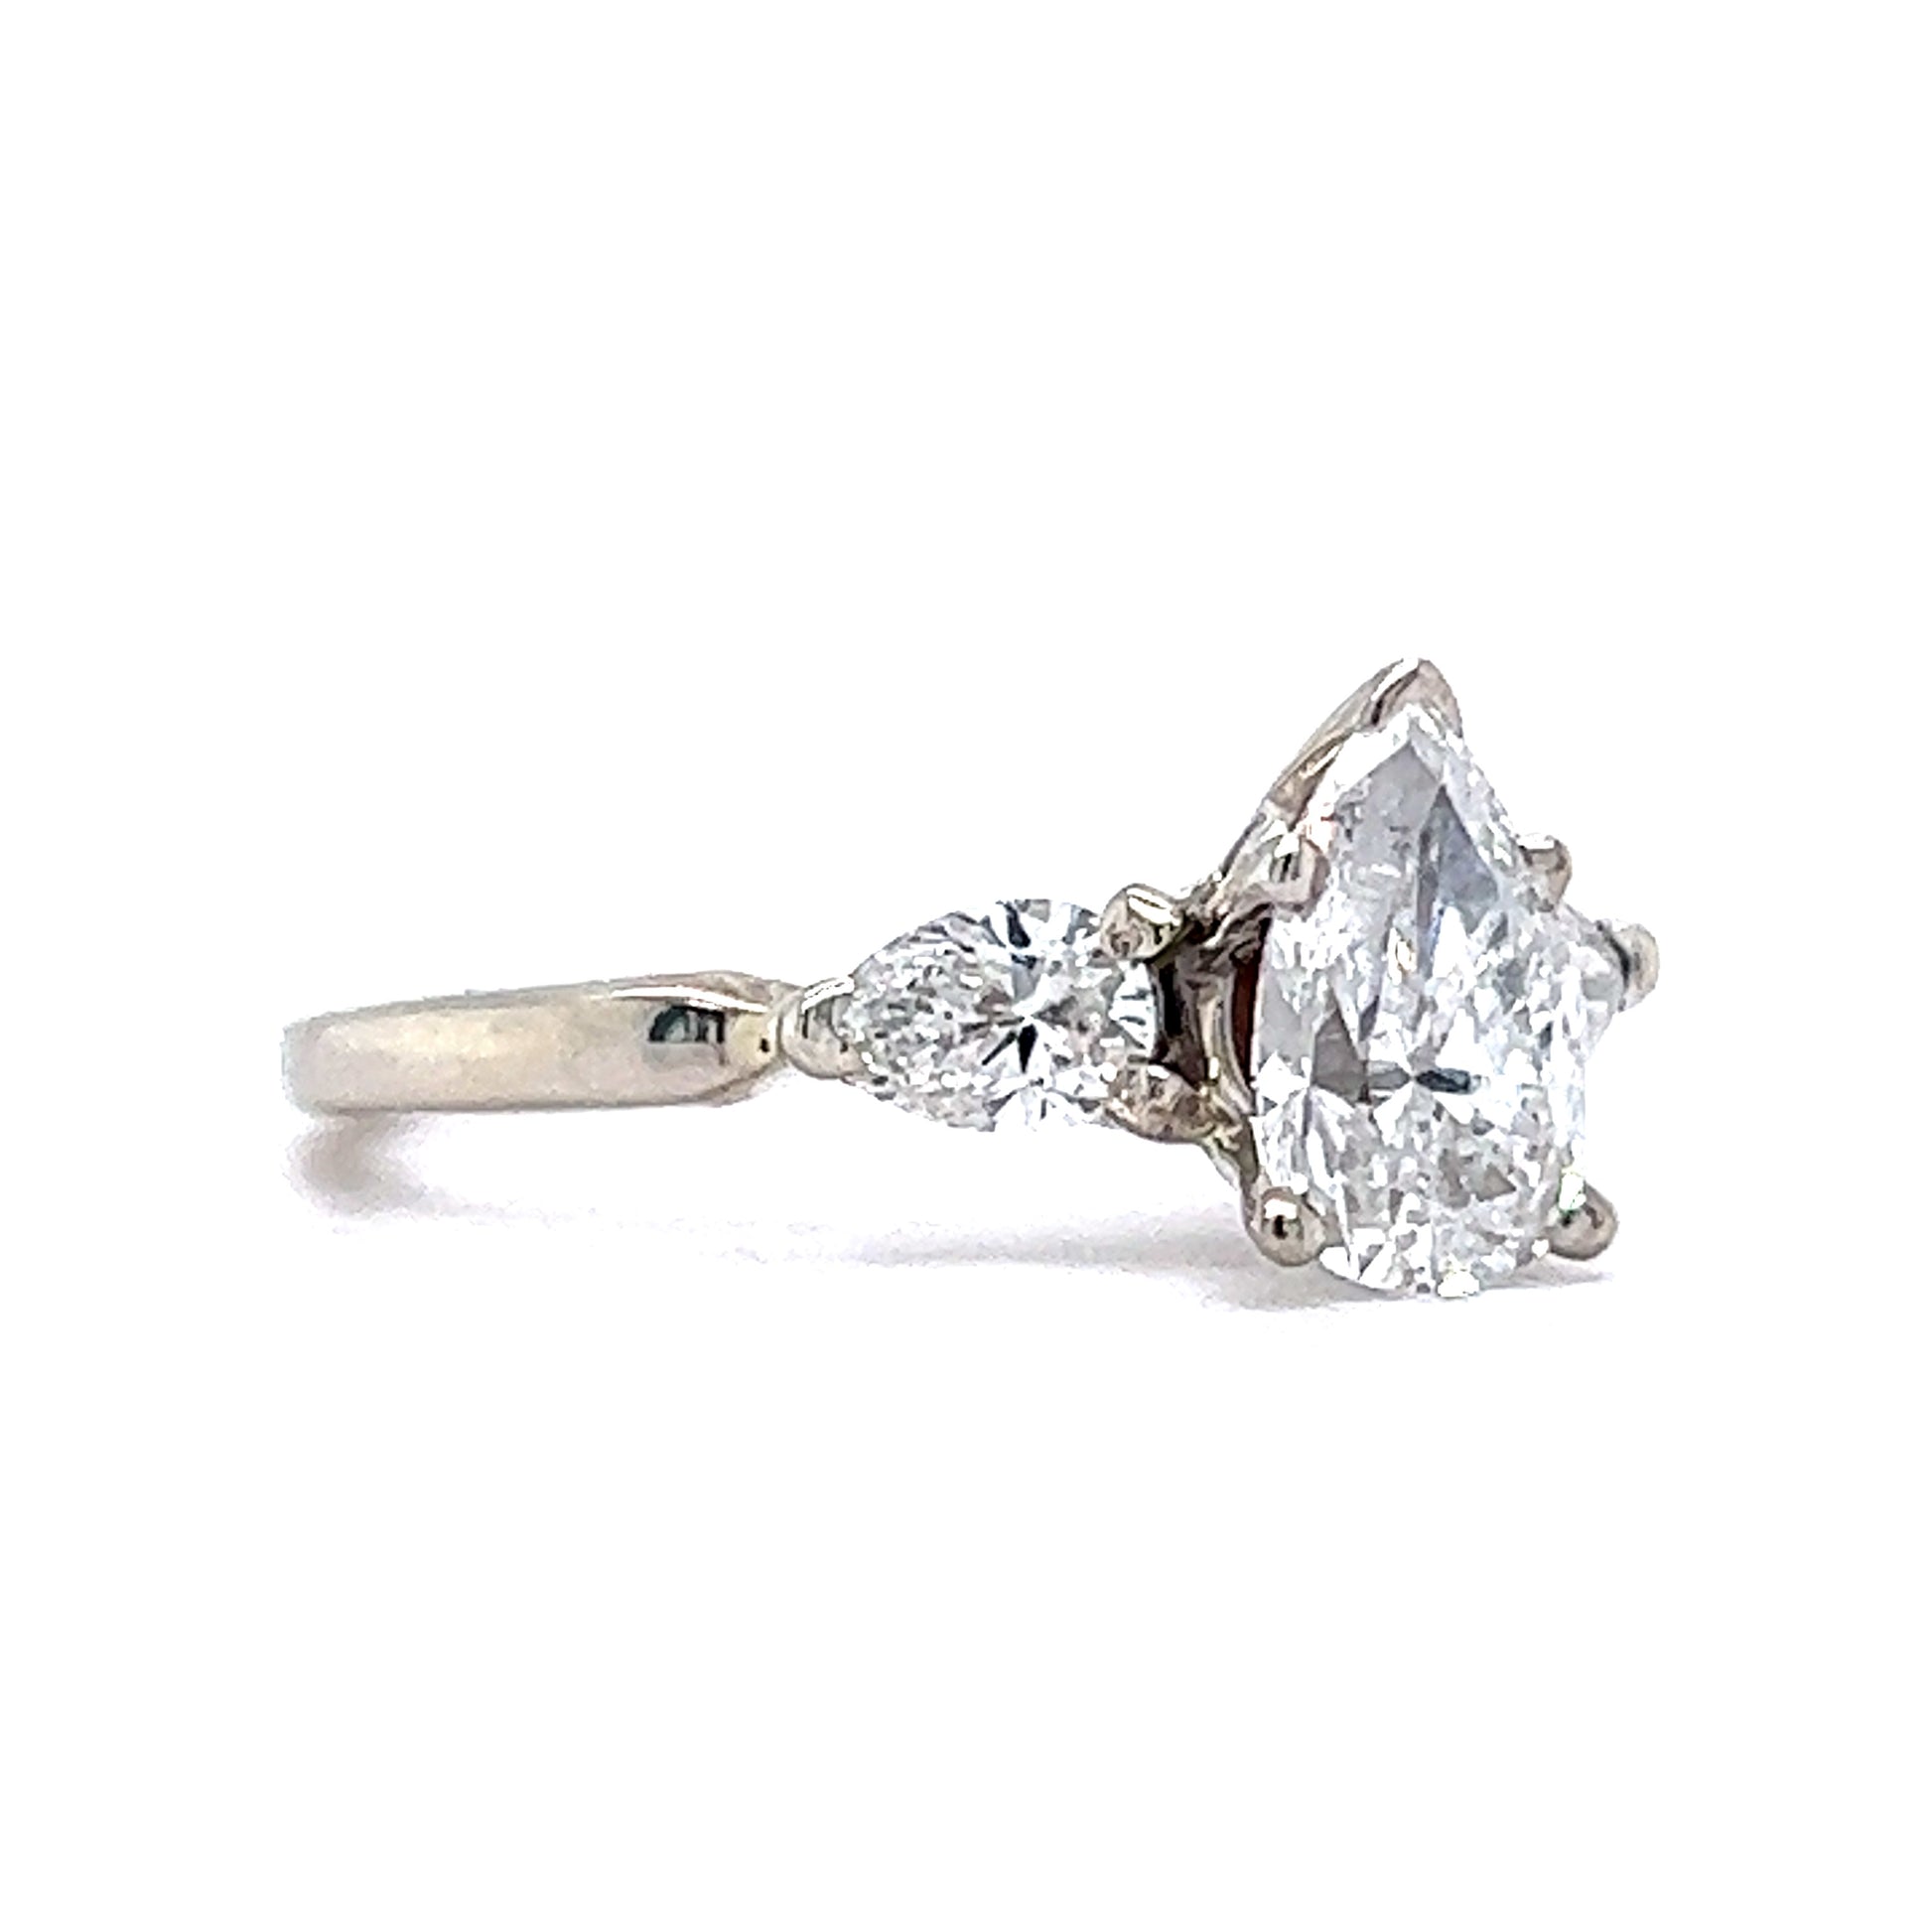 .96 White Gold Three Stone Pear Diamond RingComposition: 14 Karat White Gold Ring Size: 6.0 Total Diamond Weight: 1.46ct Total Gram Weight: 2.6 g Inscription: 14k
      